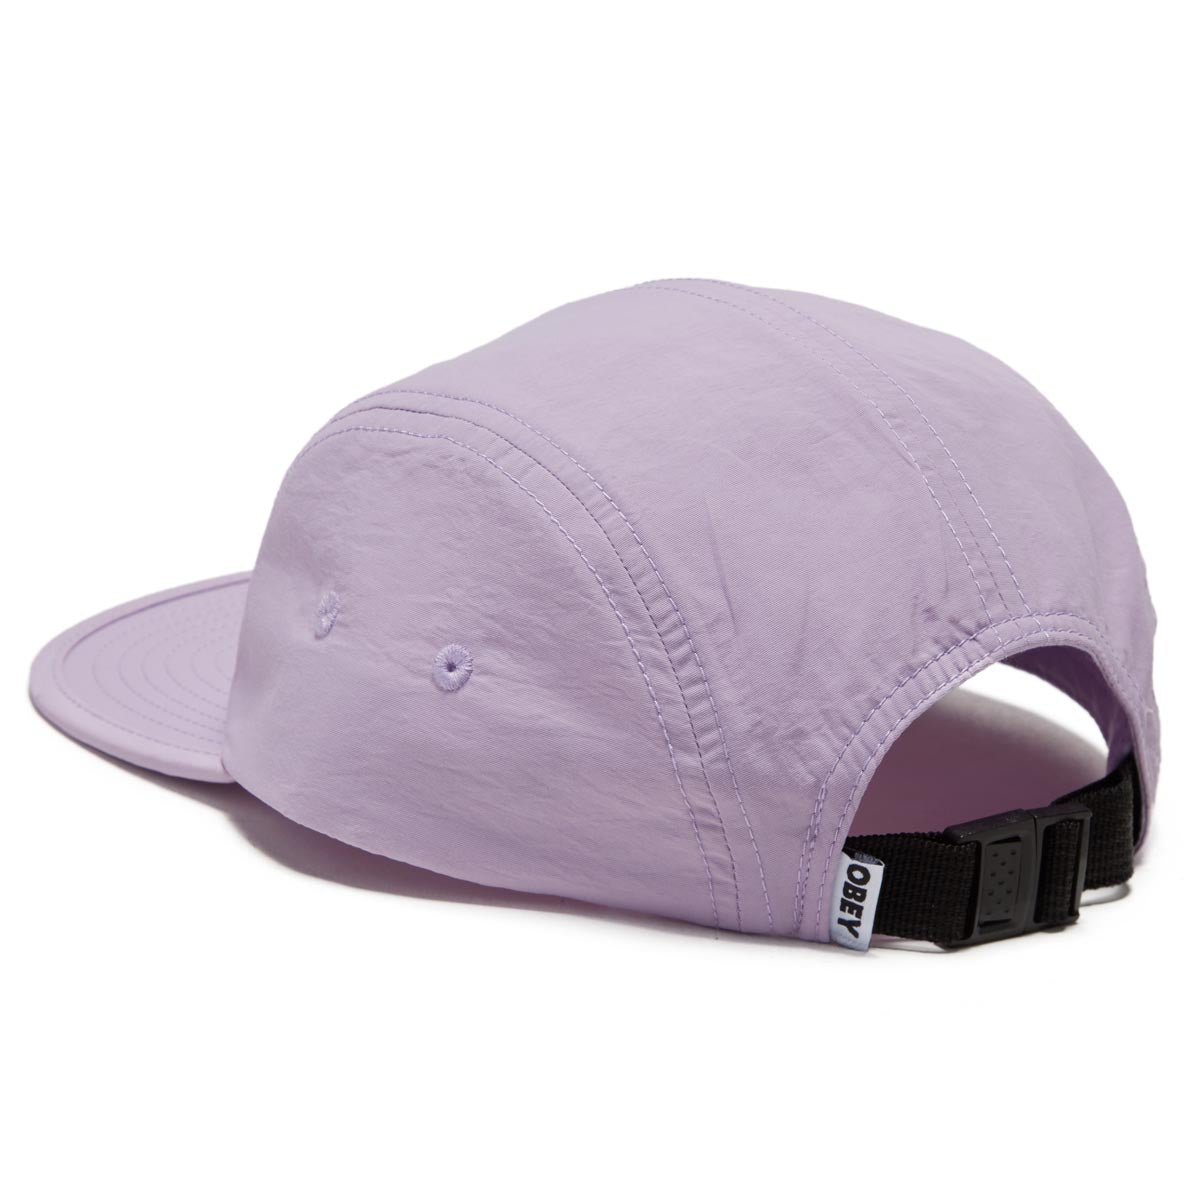 Obey Icon Patch Camp Hat - Orchid Petal image 2